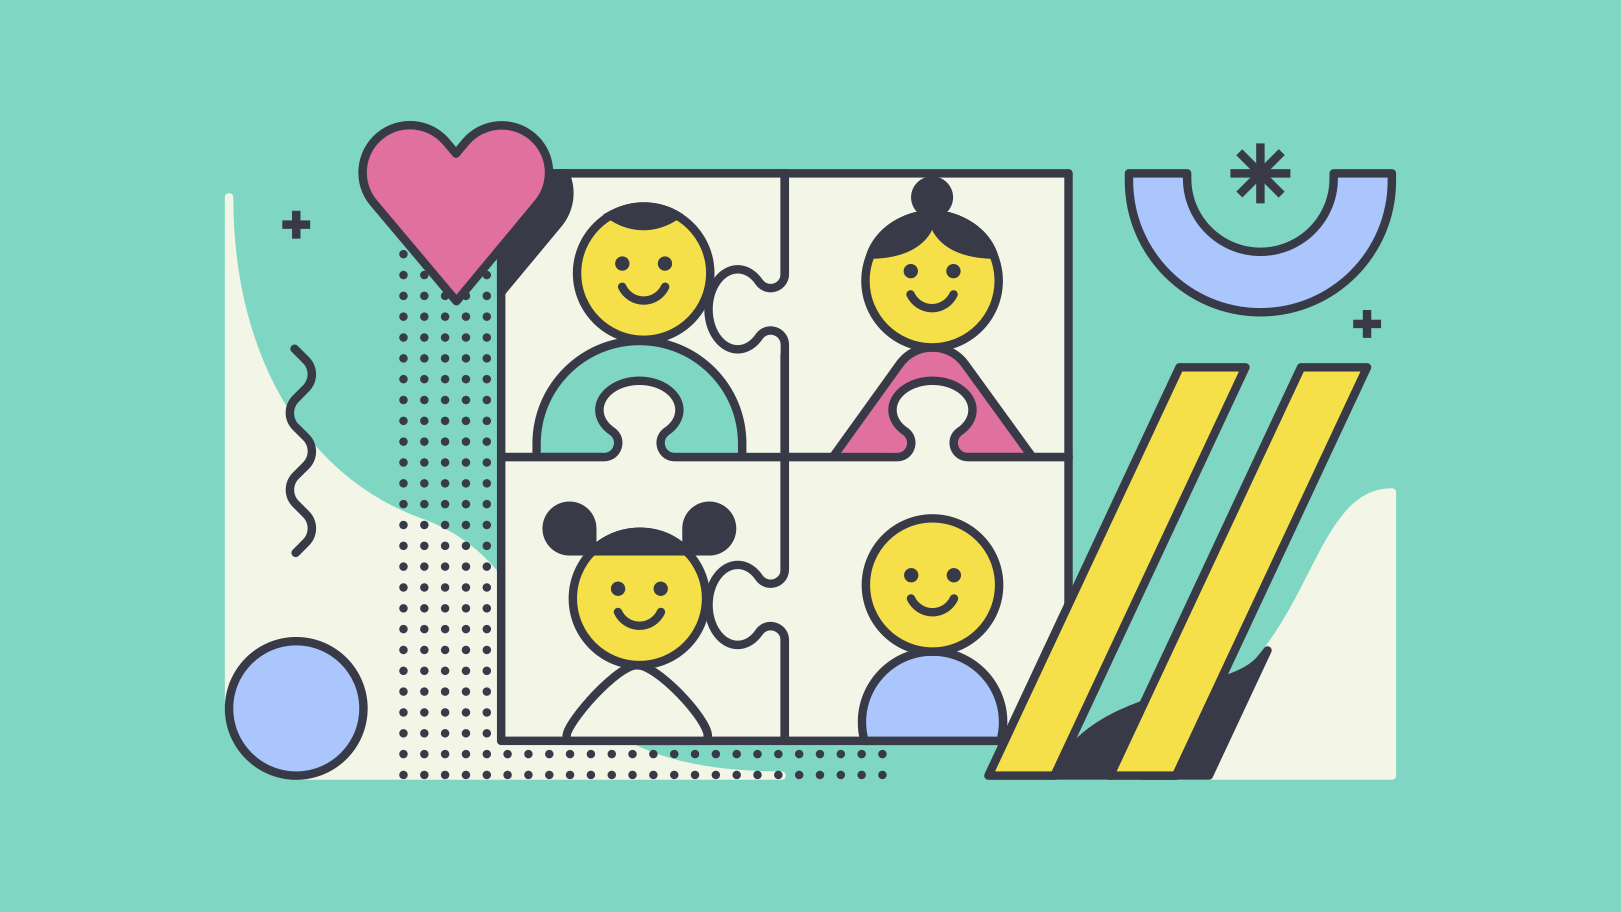 An Illustration of family | from https://icons8.com/illustrations